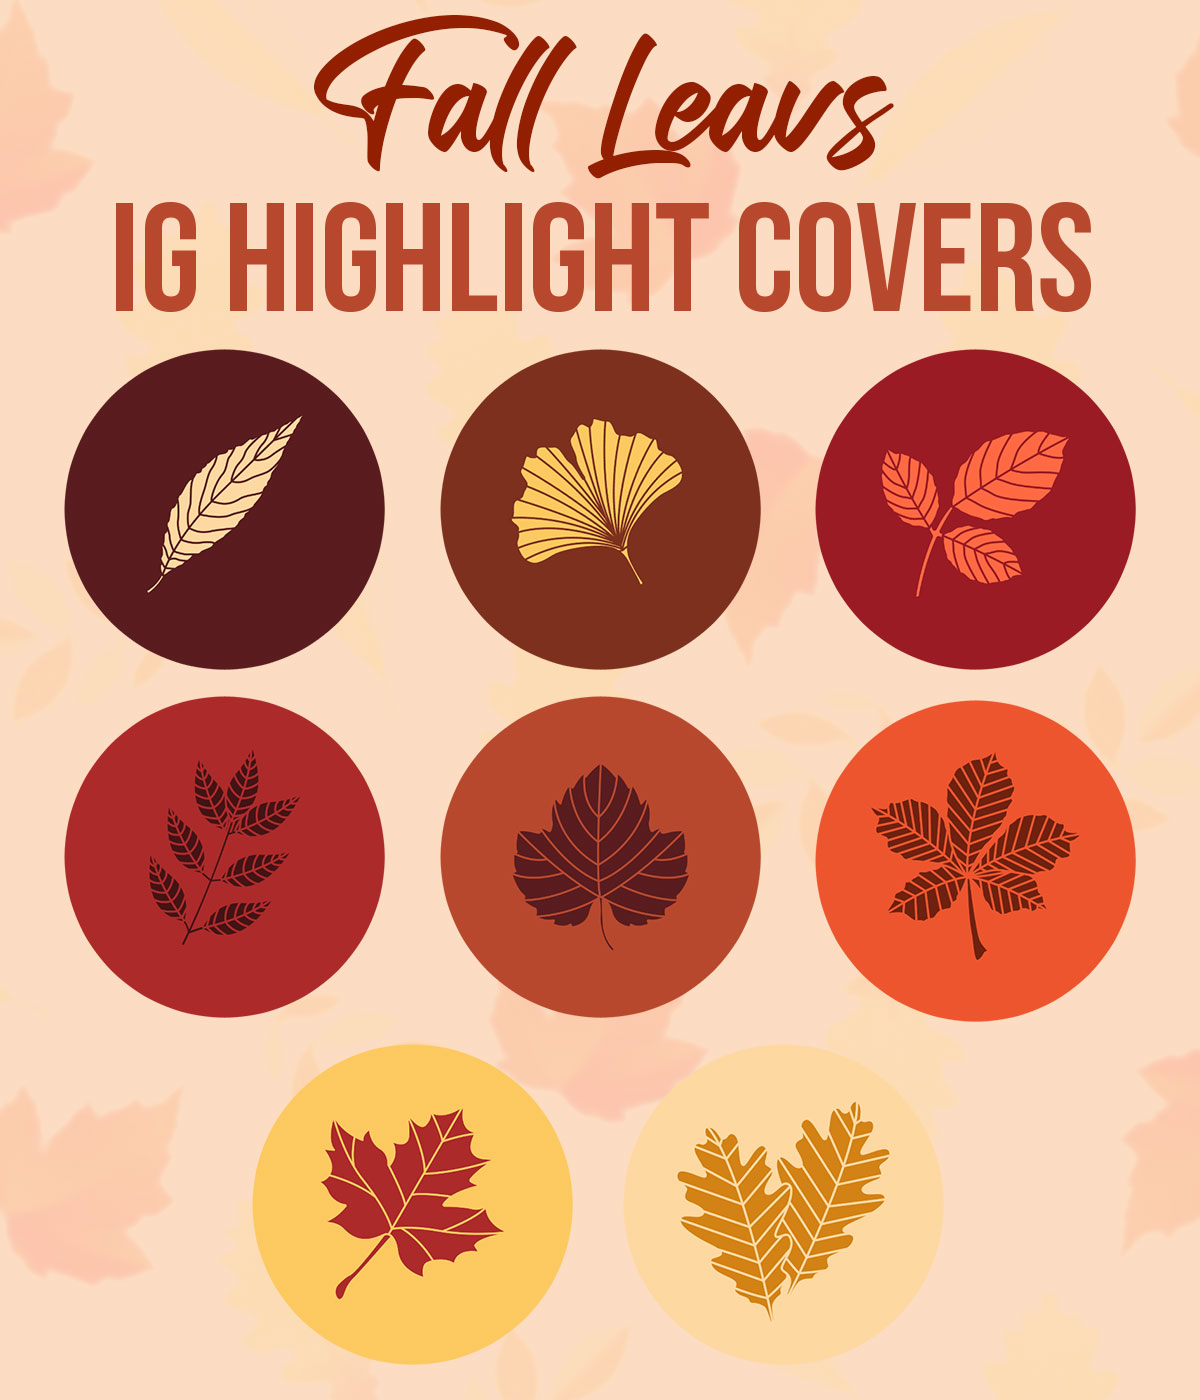 feuilles d'automne ig highlight covers pack